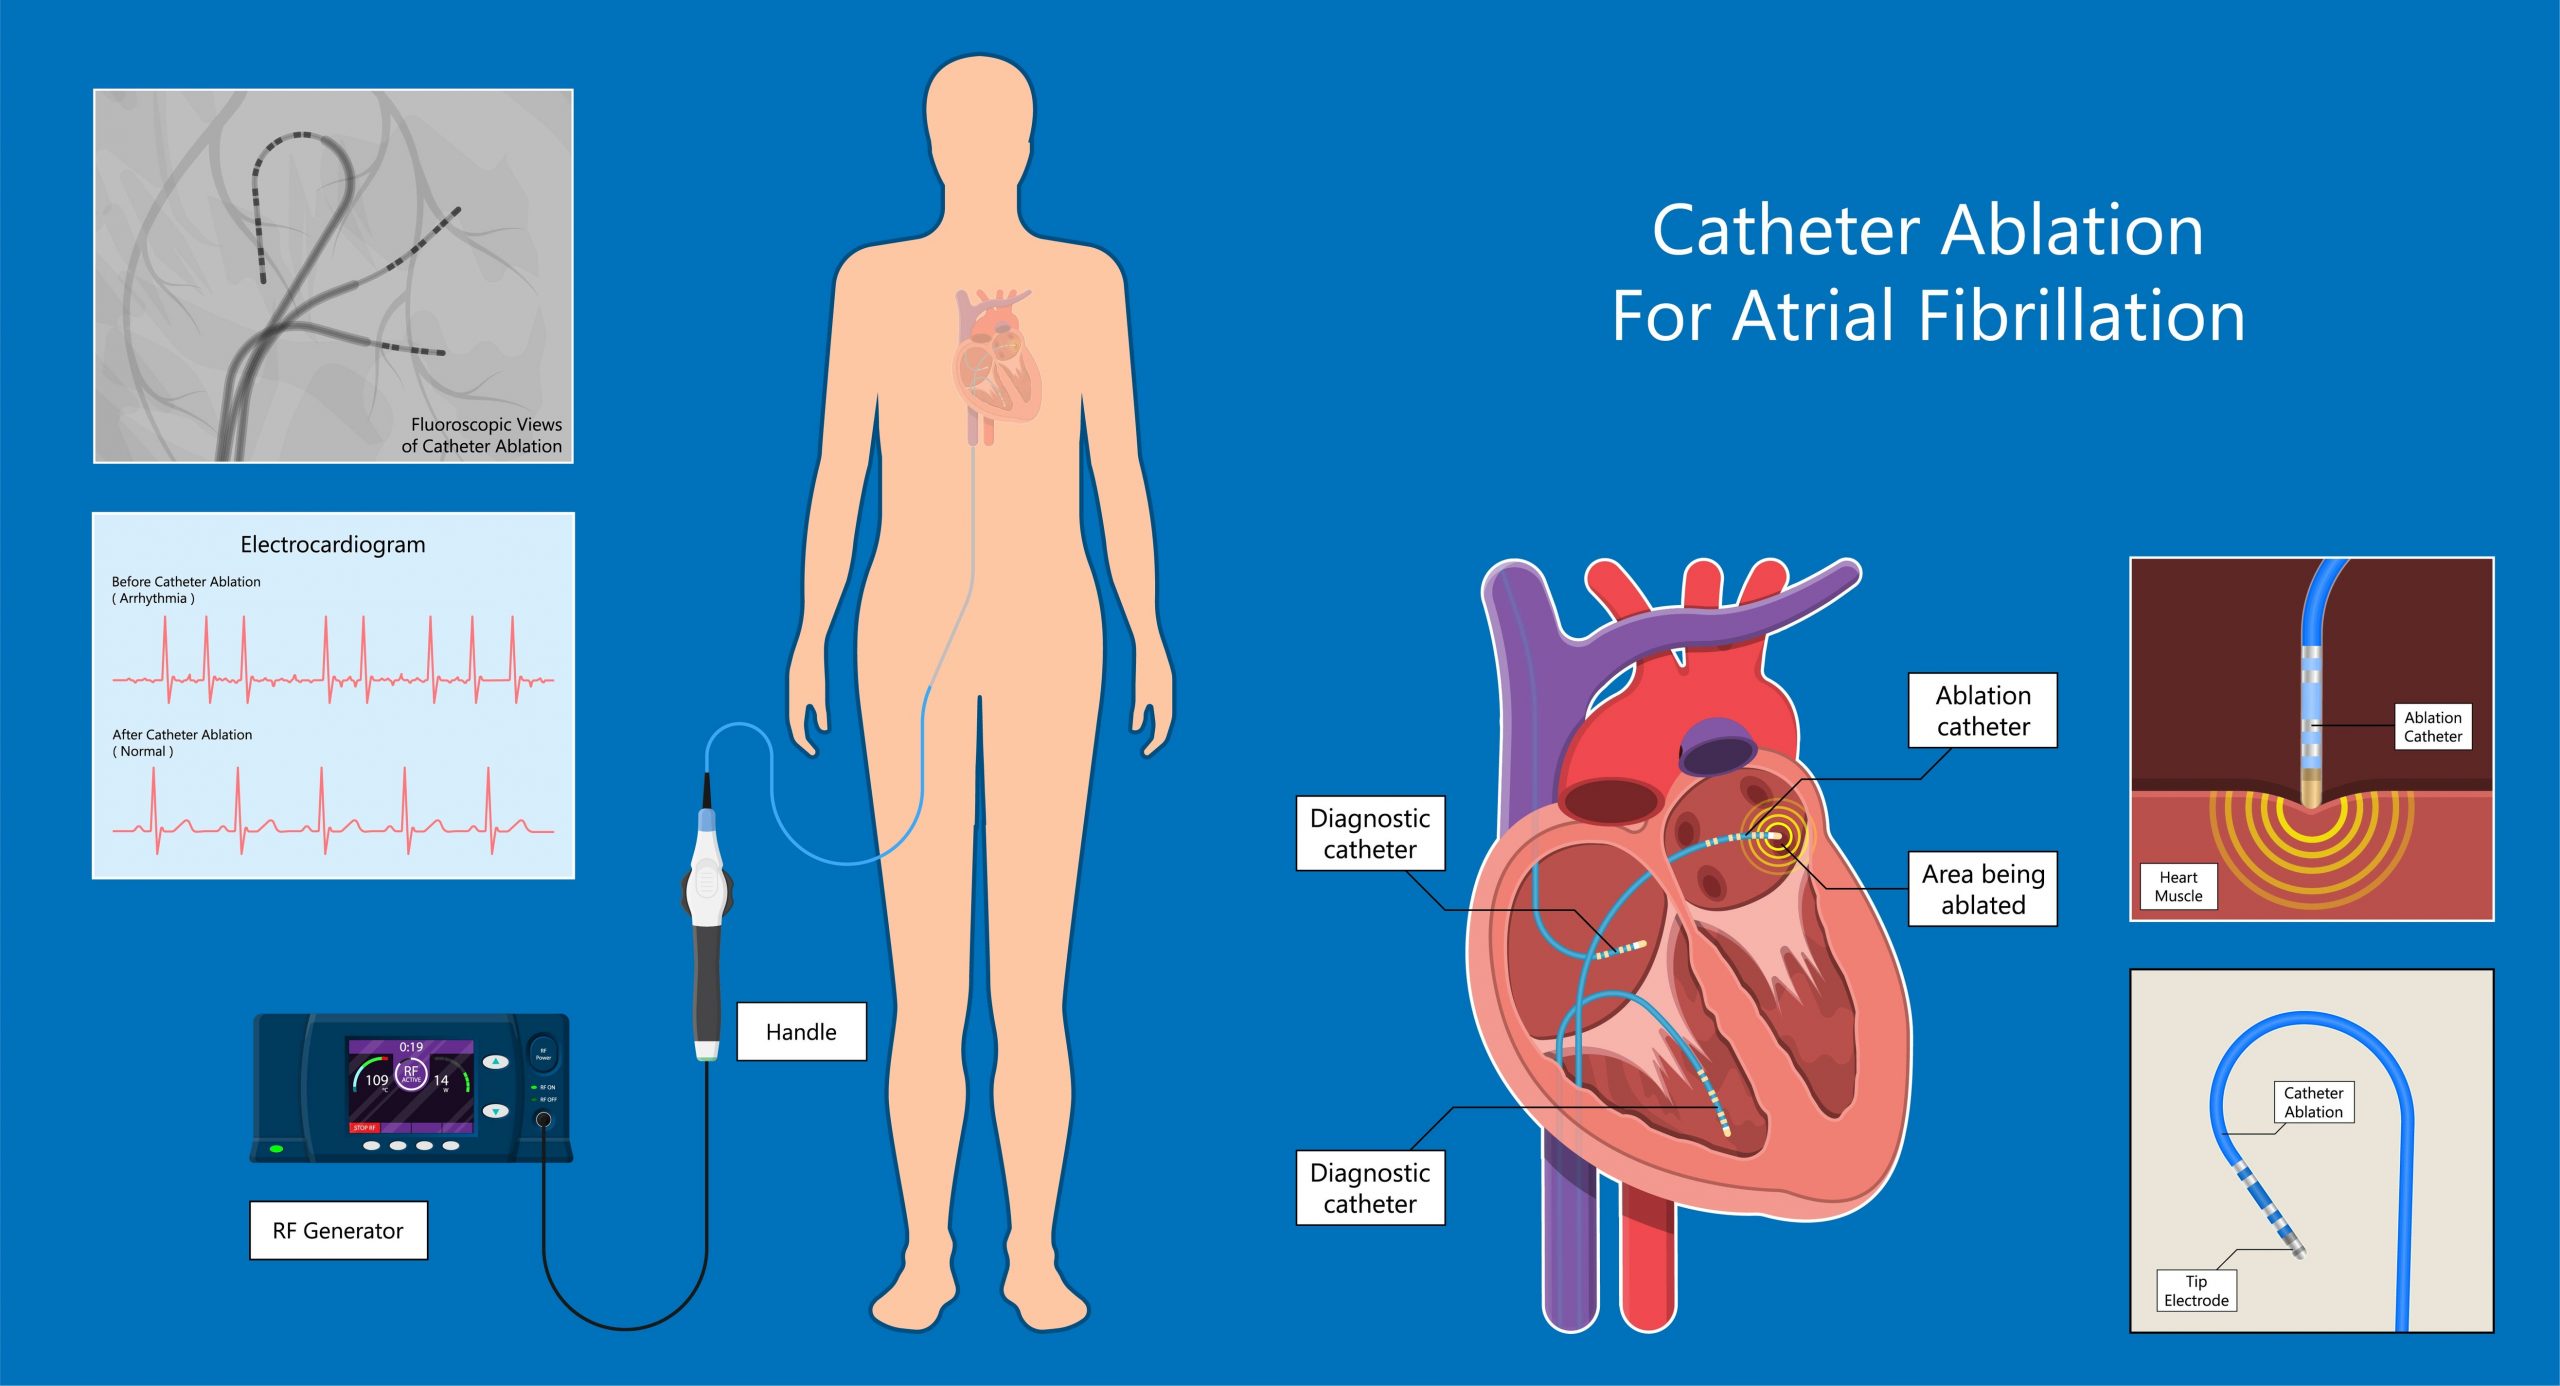 A medical illustration wih information about catheter ablation